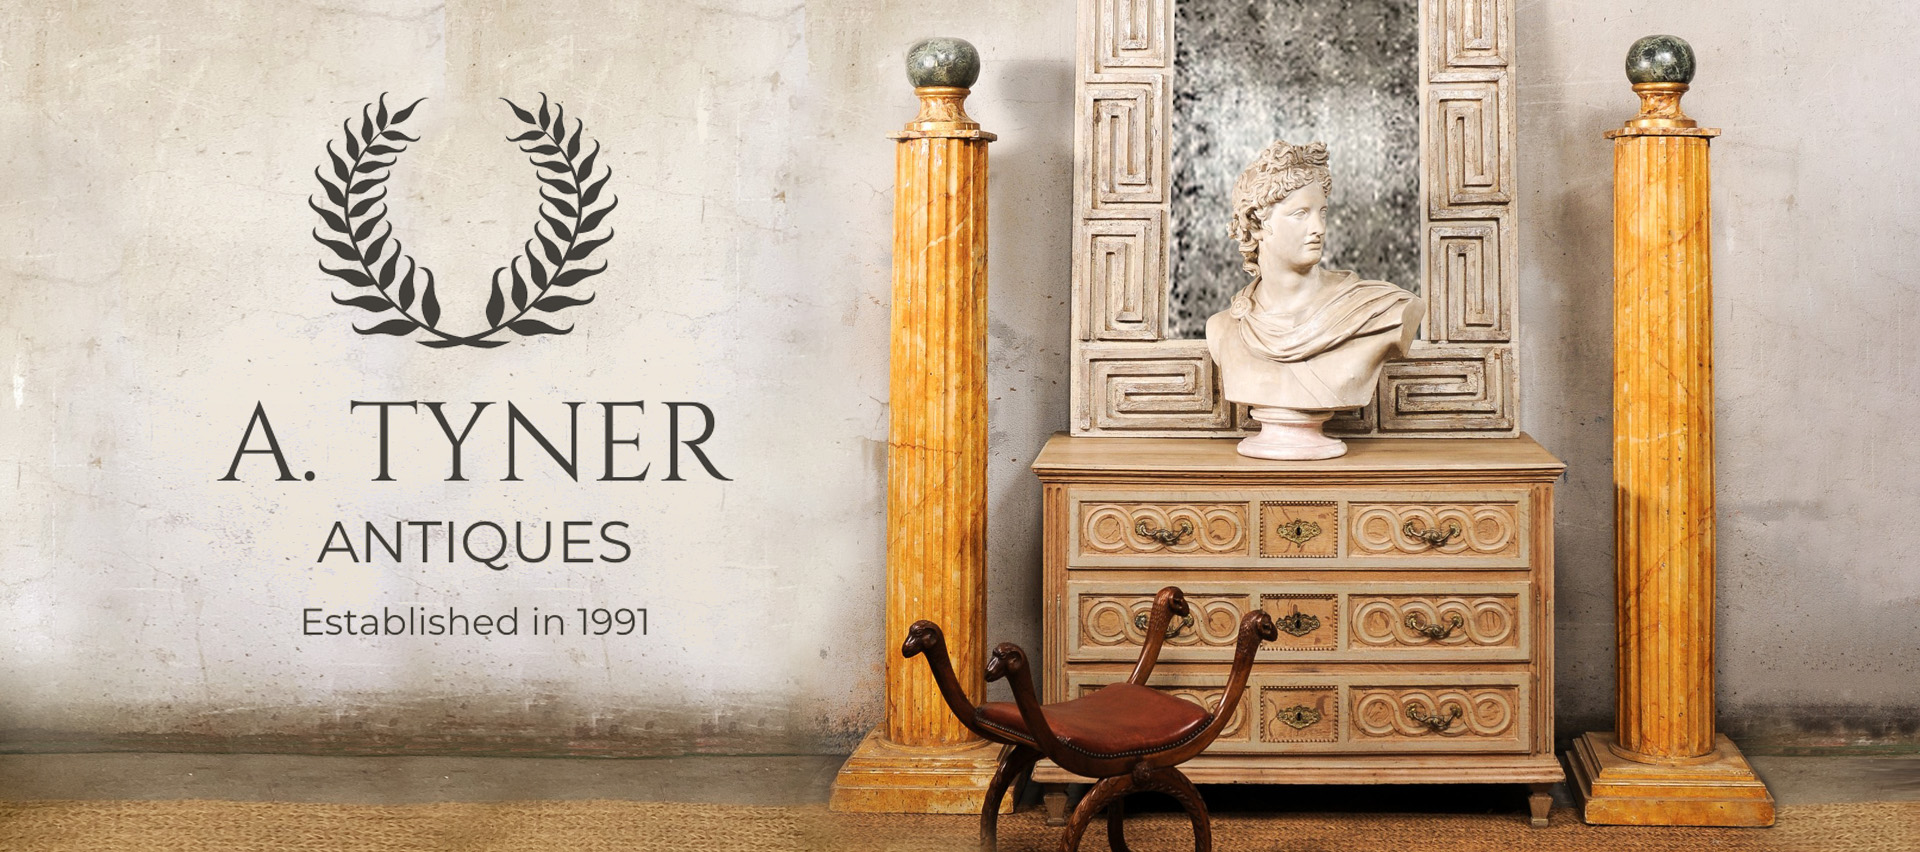 A. Tyner Antiques